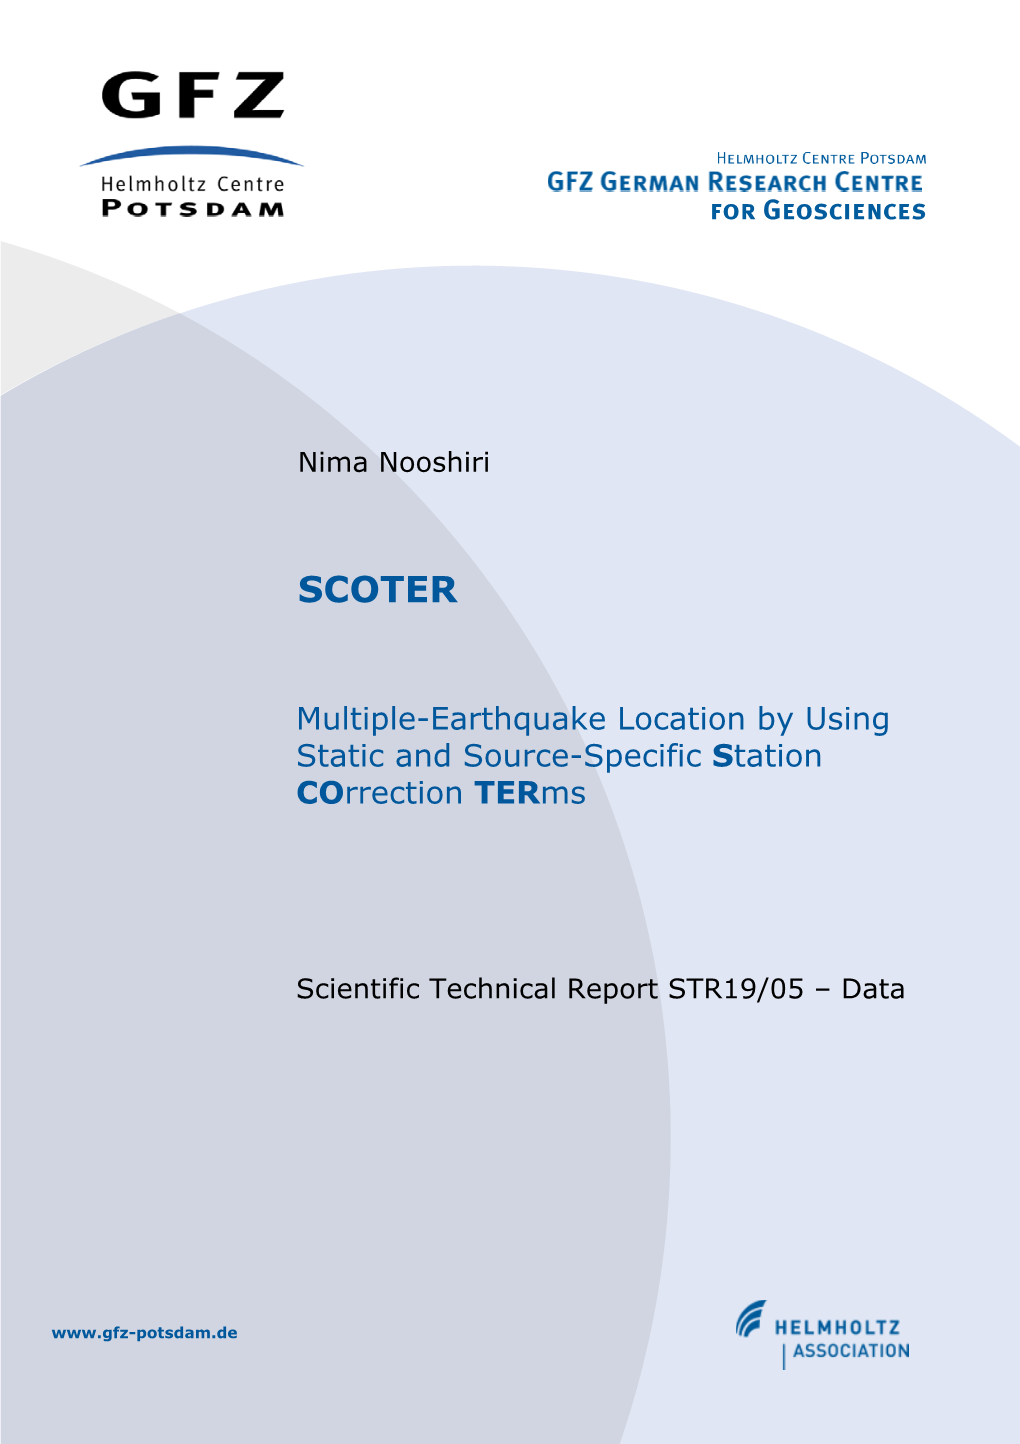 Multiple-Earthquake Location by Using Static and Source-Specific Station Correction Terms